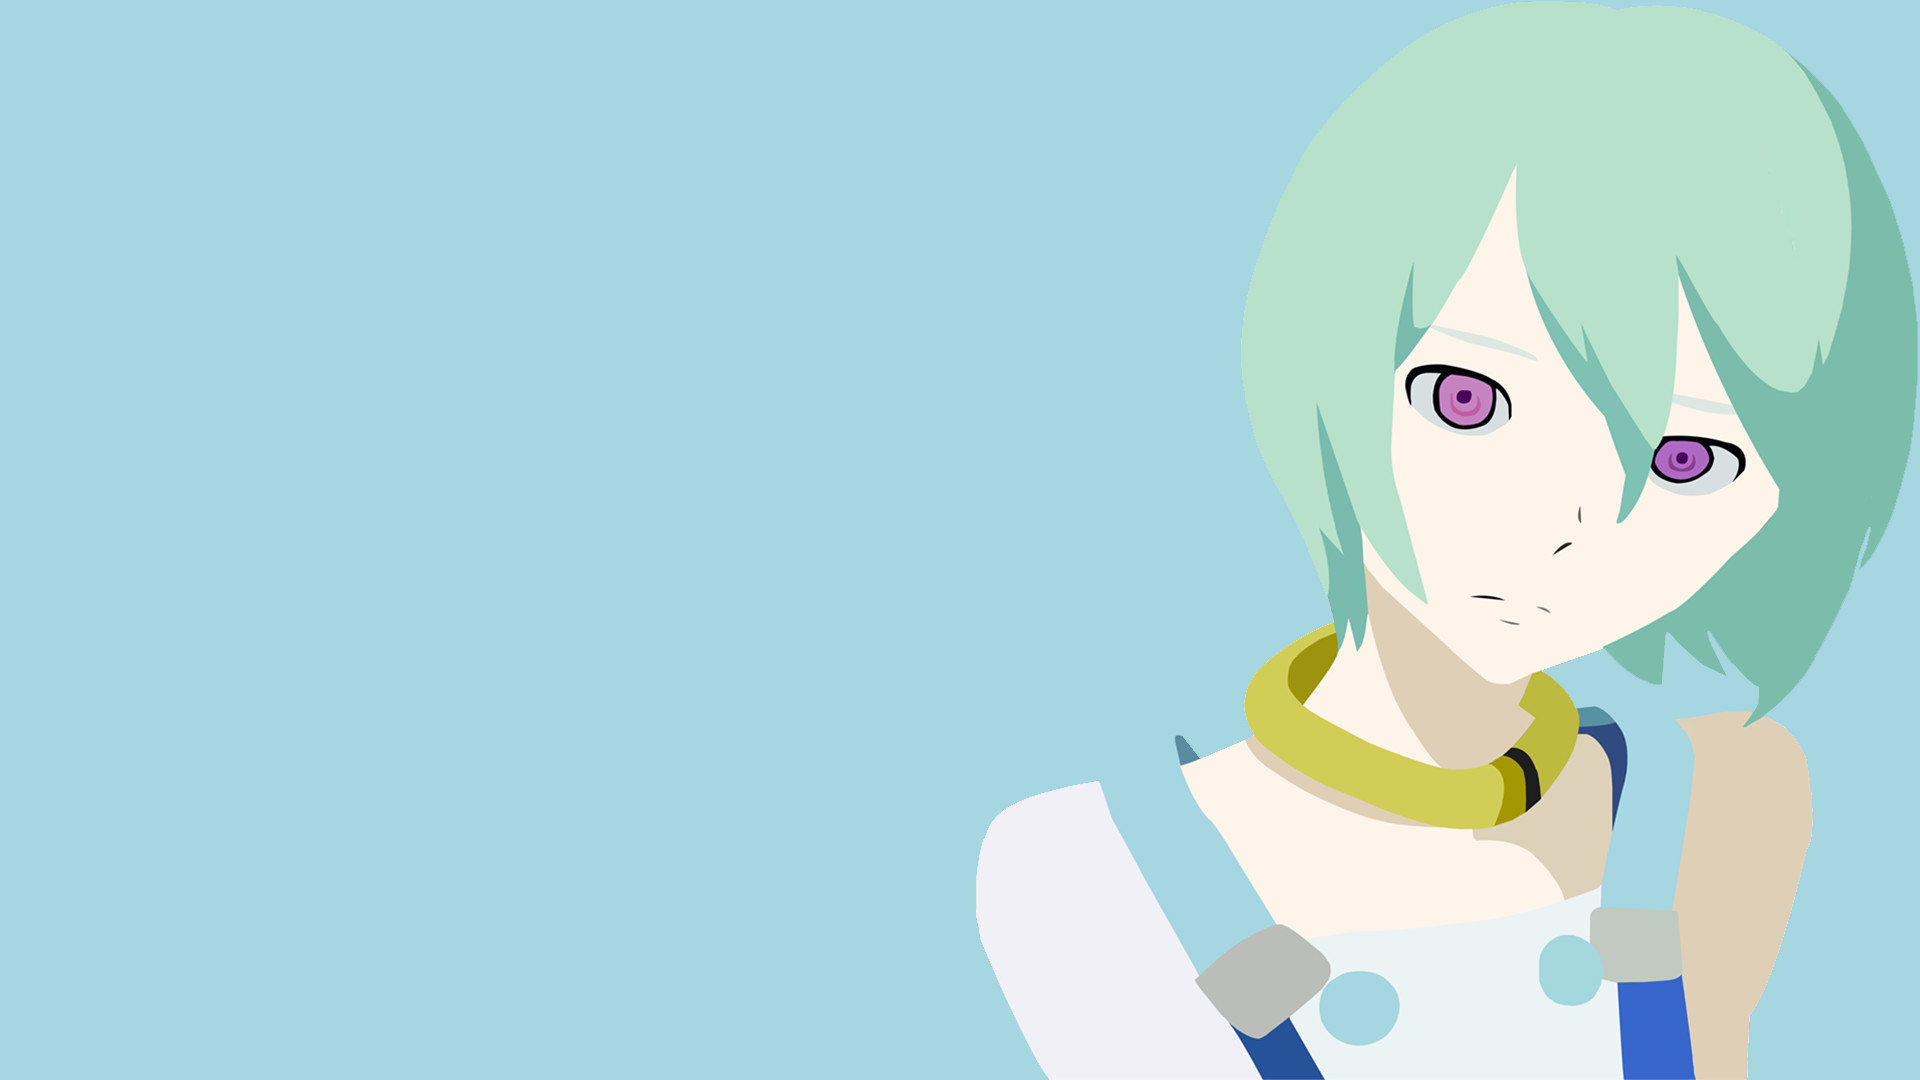 1920x1080 Anyone interested in a Eureka Seven wallpaper that I basically just  completed?